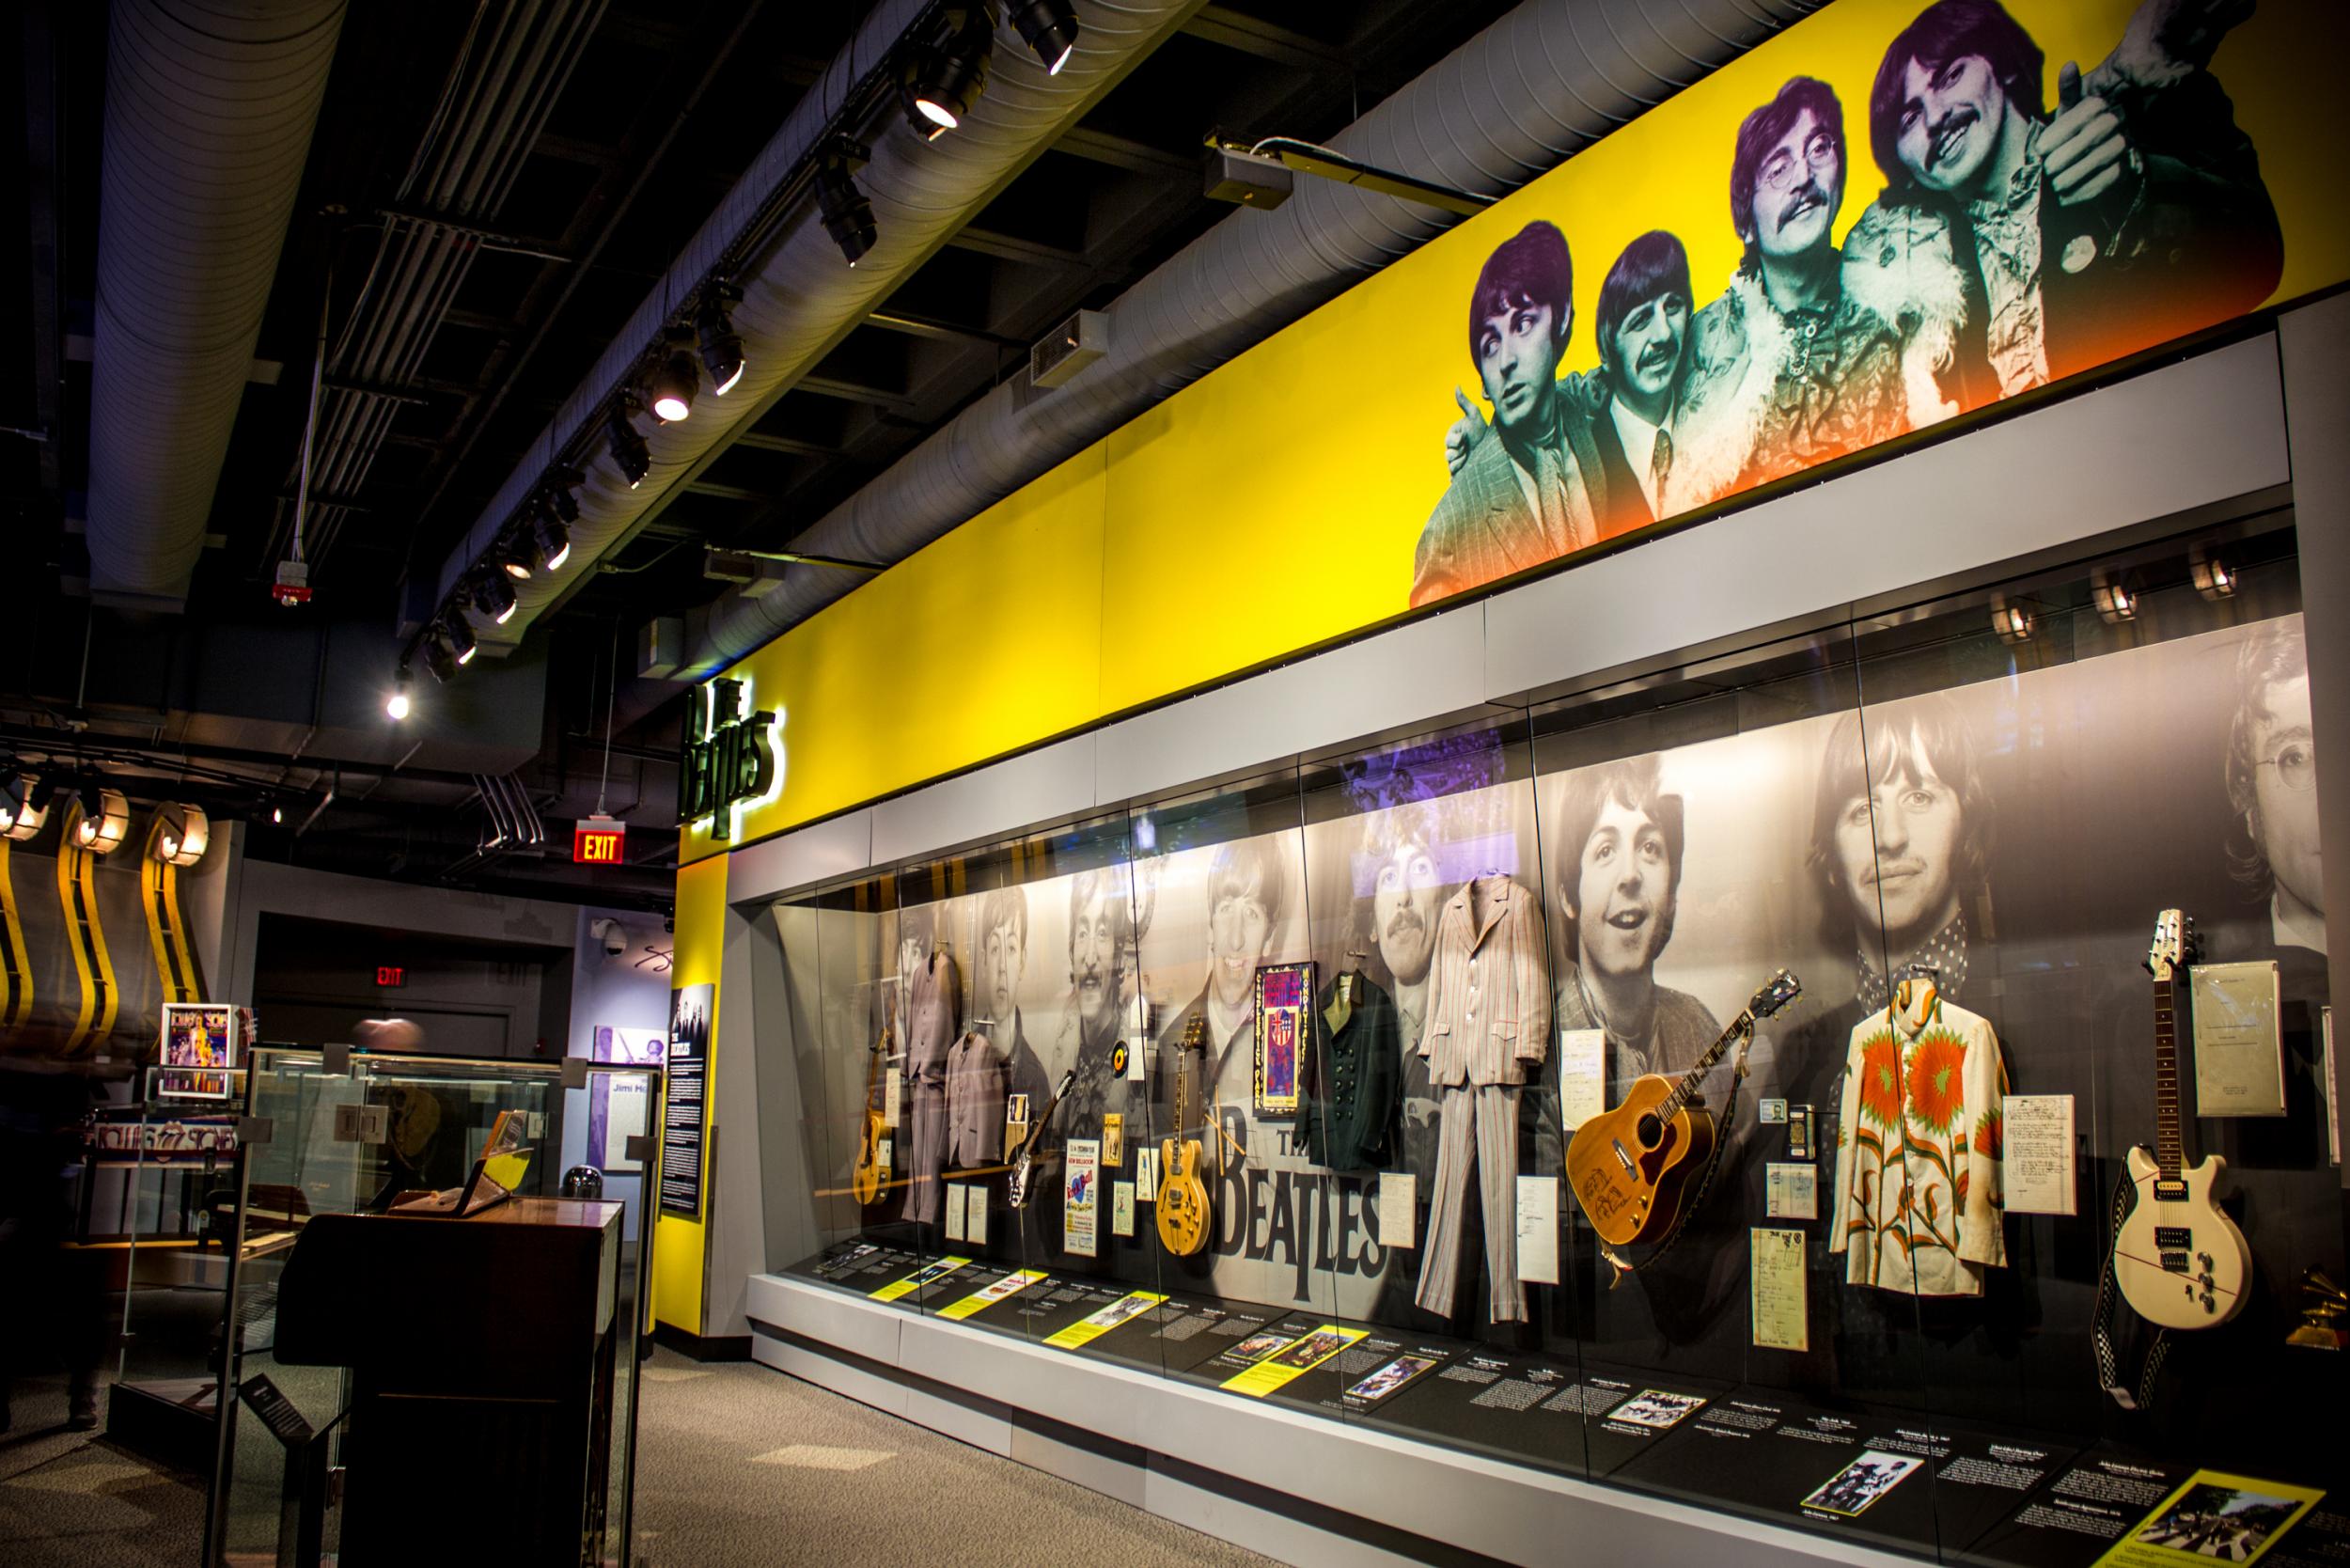 inkl - Rock & Roll Hall of Fame: Inside the museum where music history